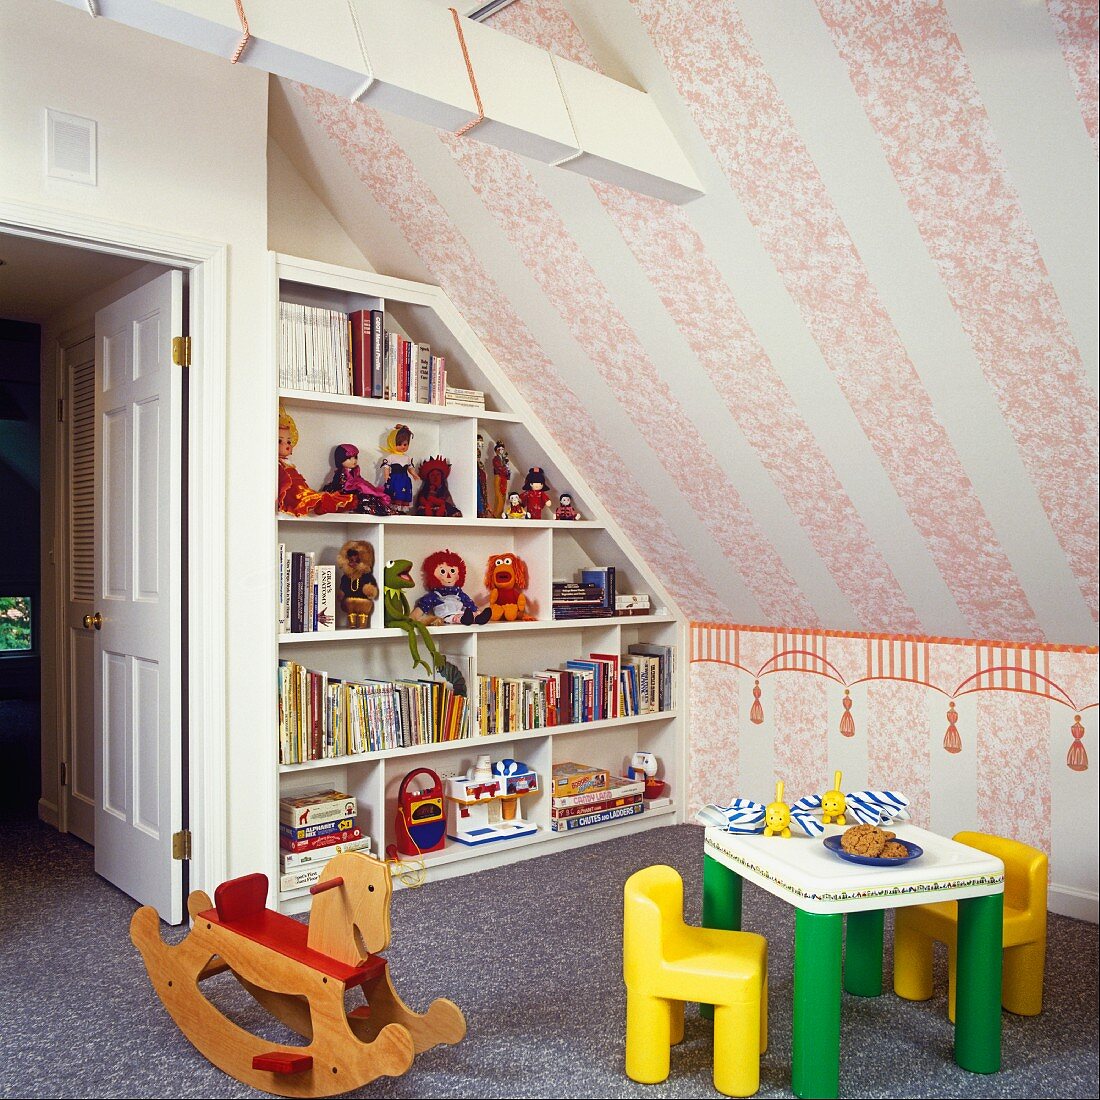 Corner of child's attic bedroom with books and toys on shelving, children's furniture and wooden rocking horse